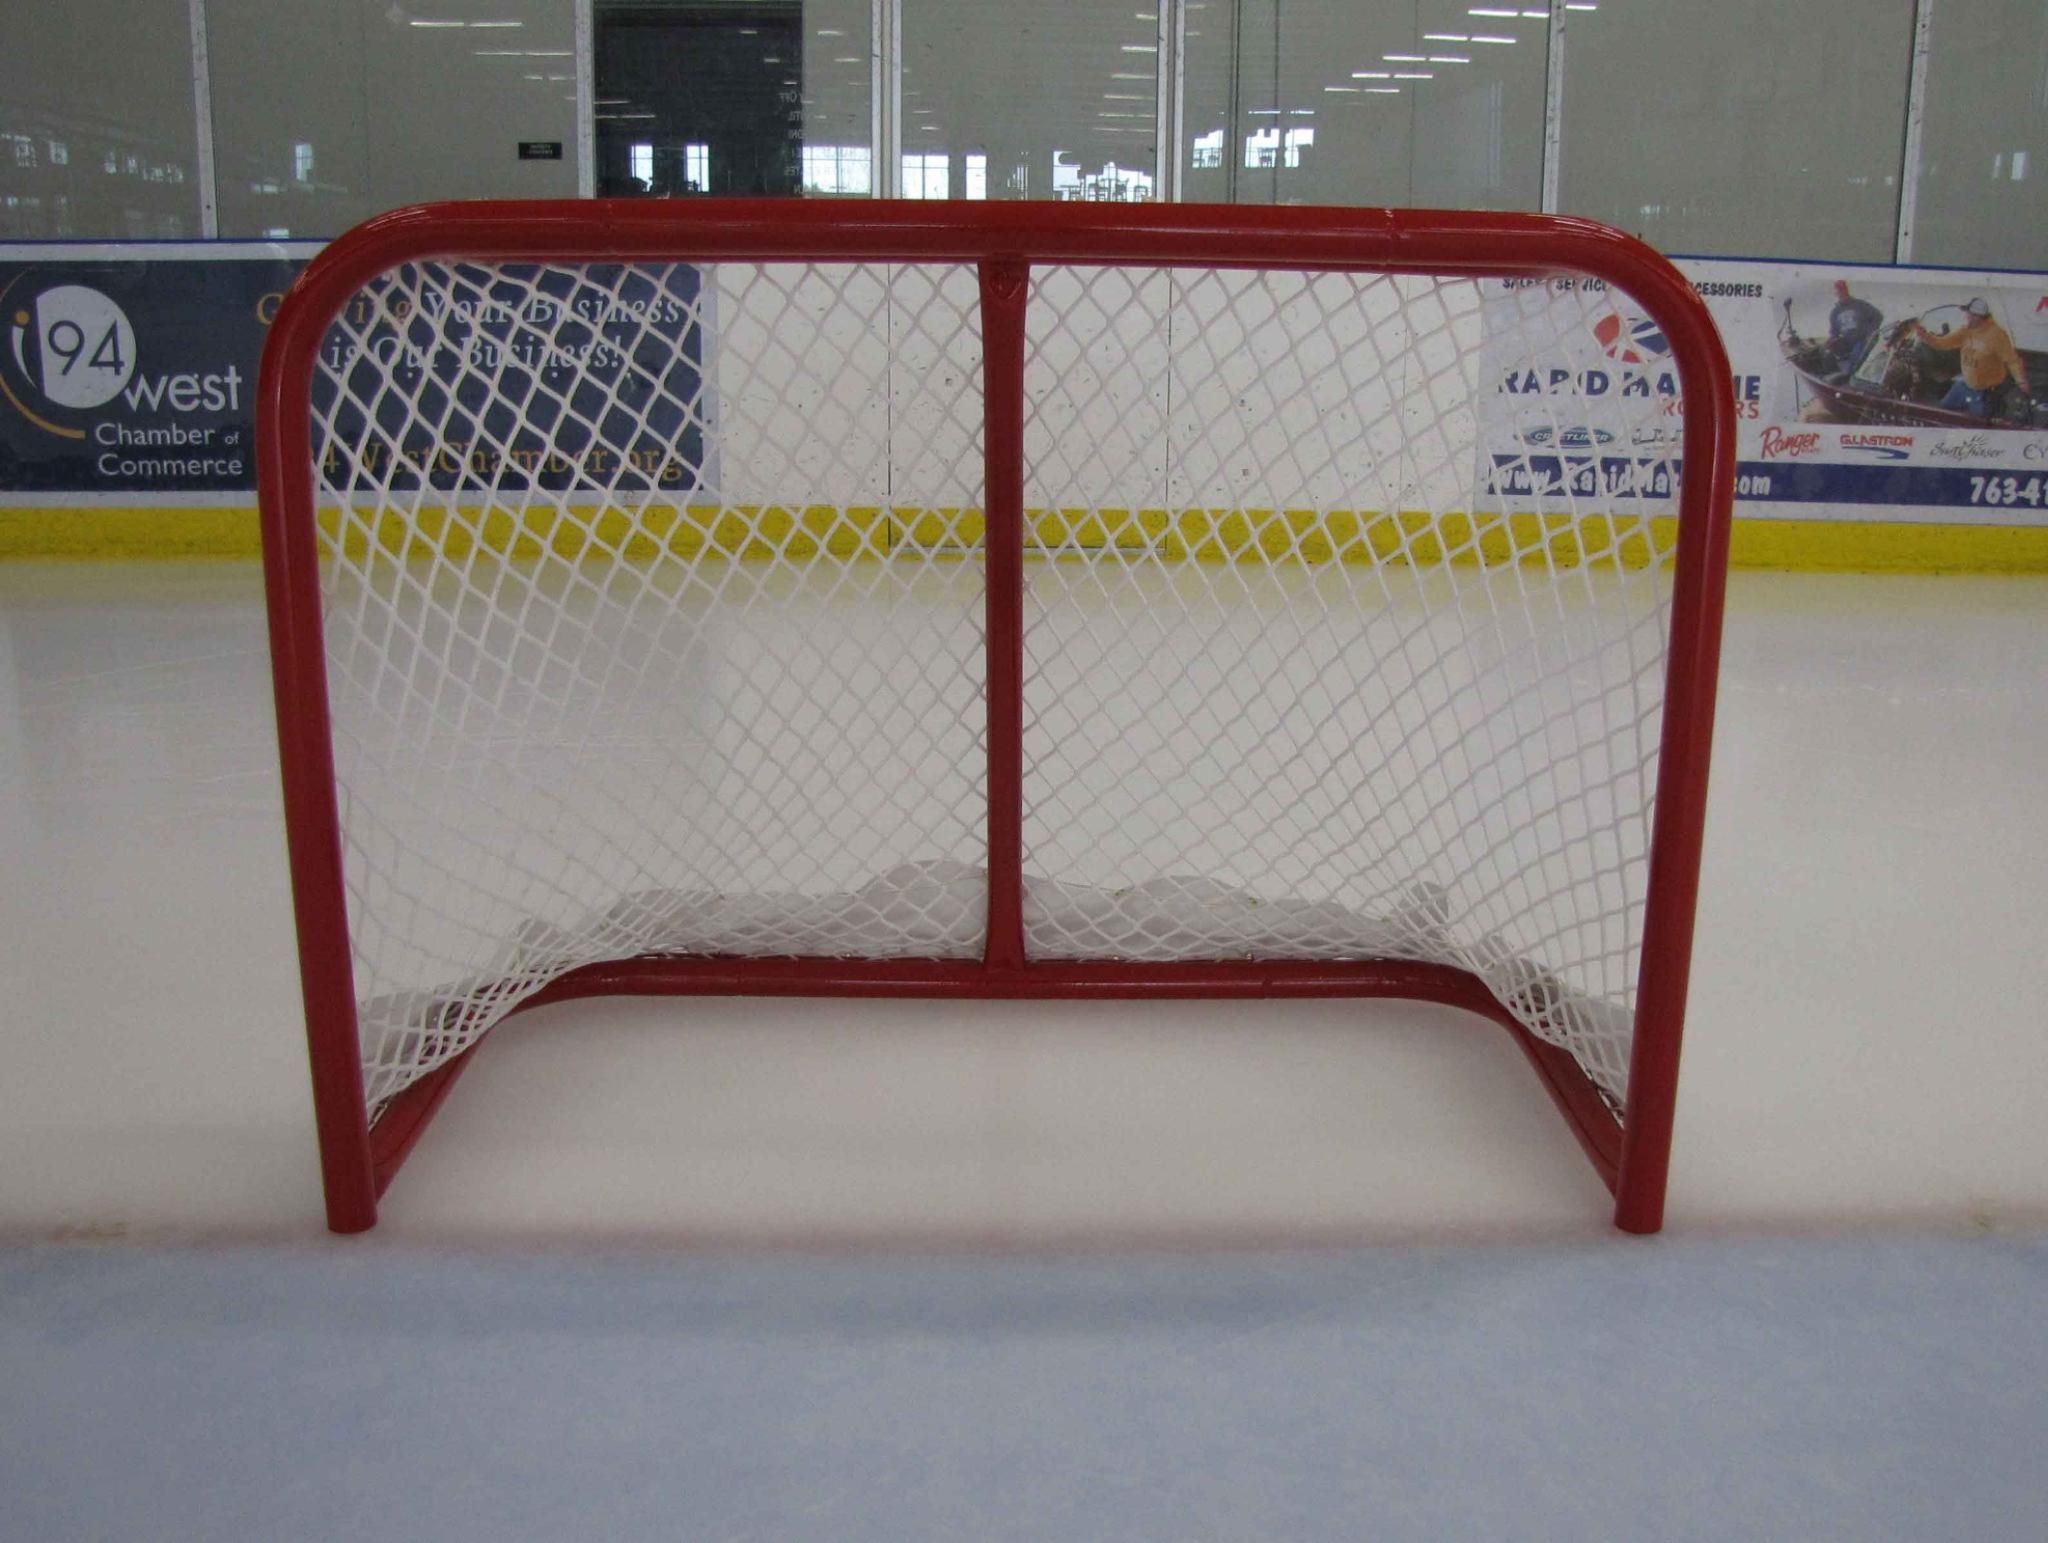 4' x 3' Cross-Ice Steel Hockey Goal Frame; 24” Rectangular Base Depth; Welded Lacing Bar for Attaching Net; Red Powder-Coated Finish; Age 8U Players.